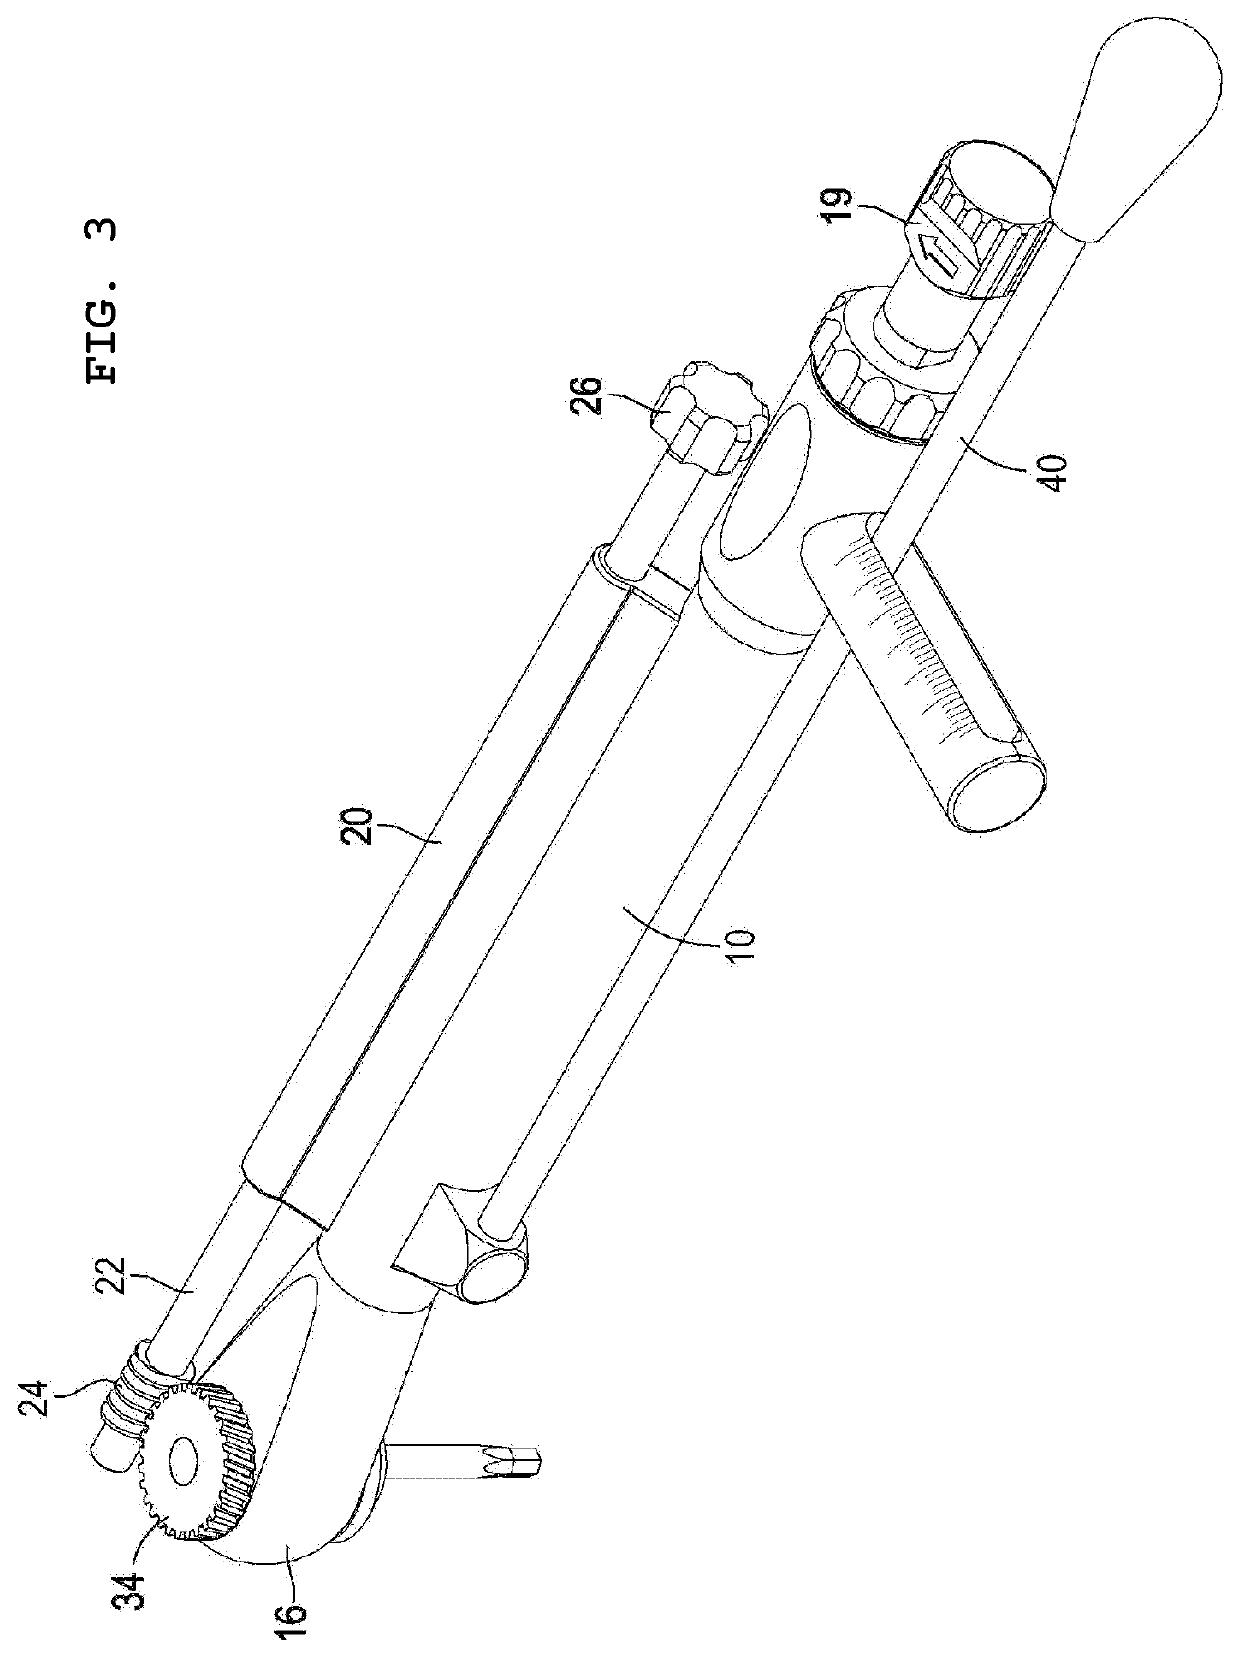 Torque Wrench for Implant Procedure